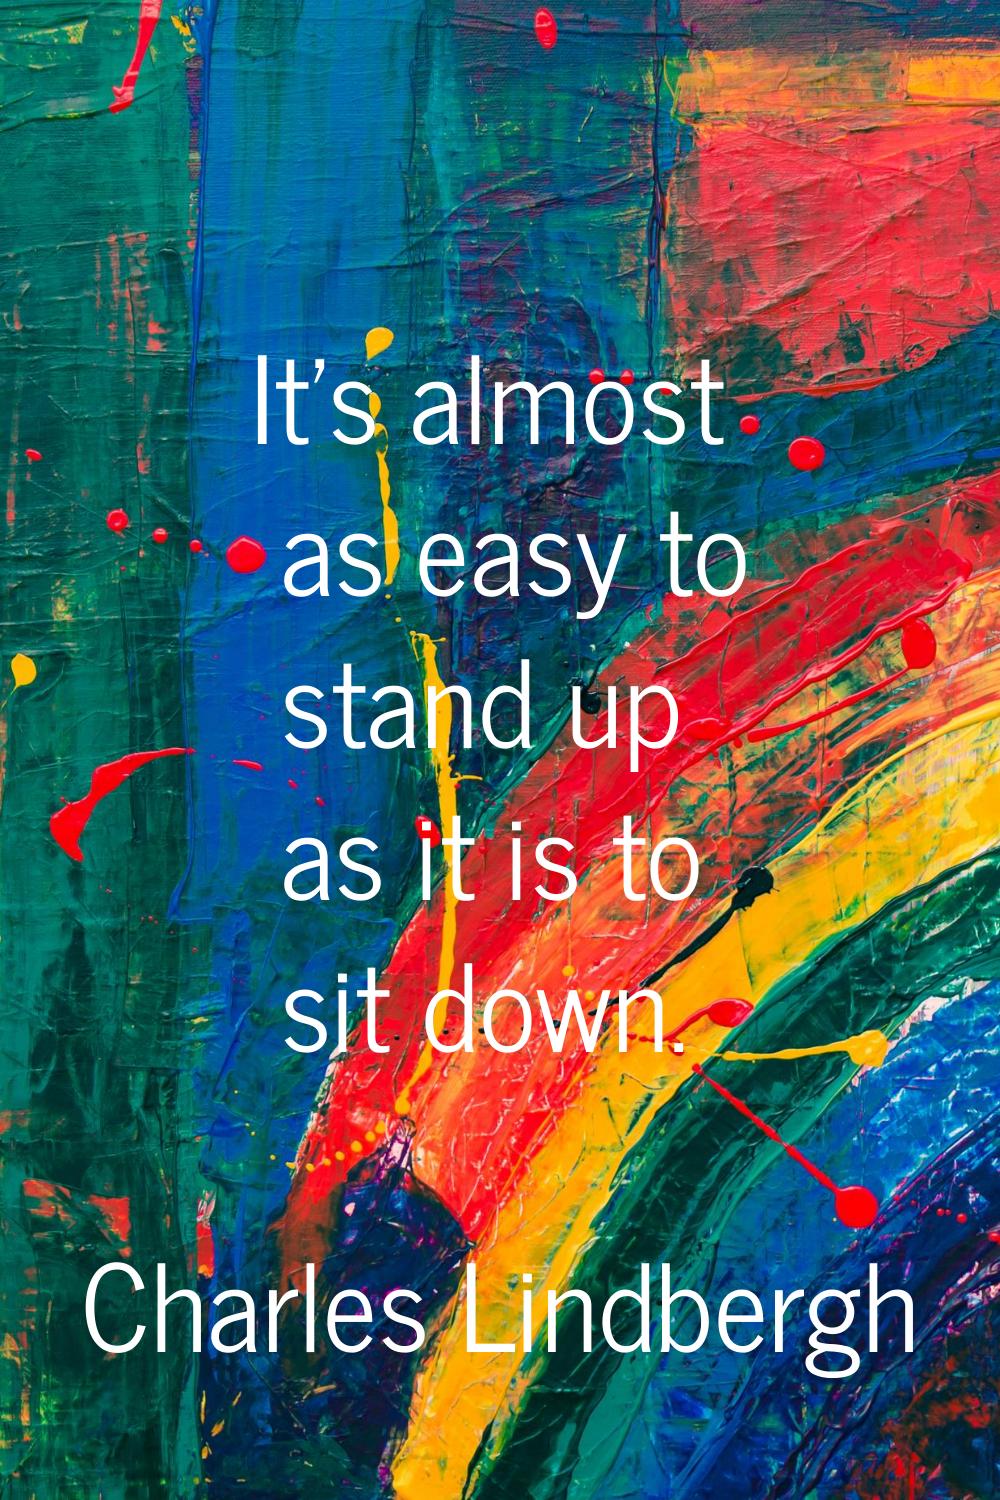 It's almost as easy to stand up as it is to sit down.